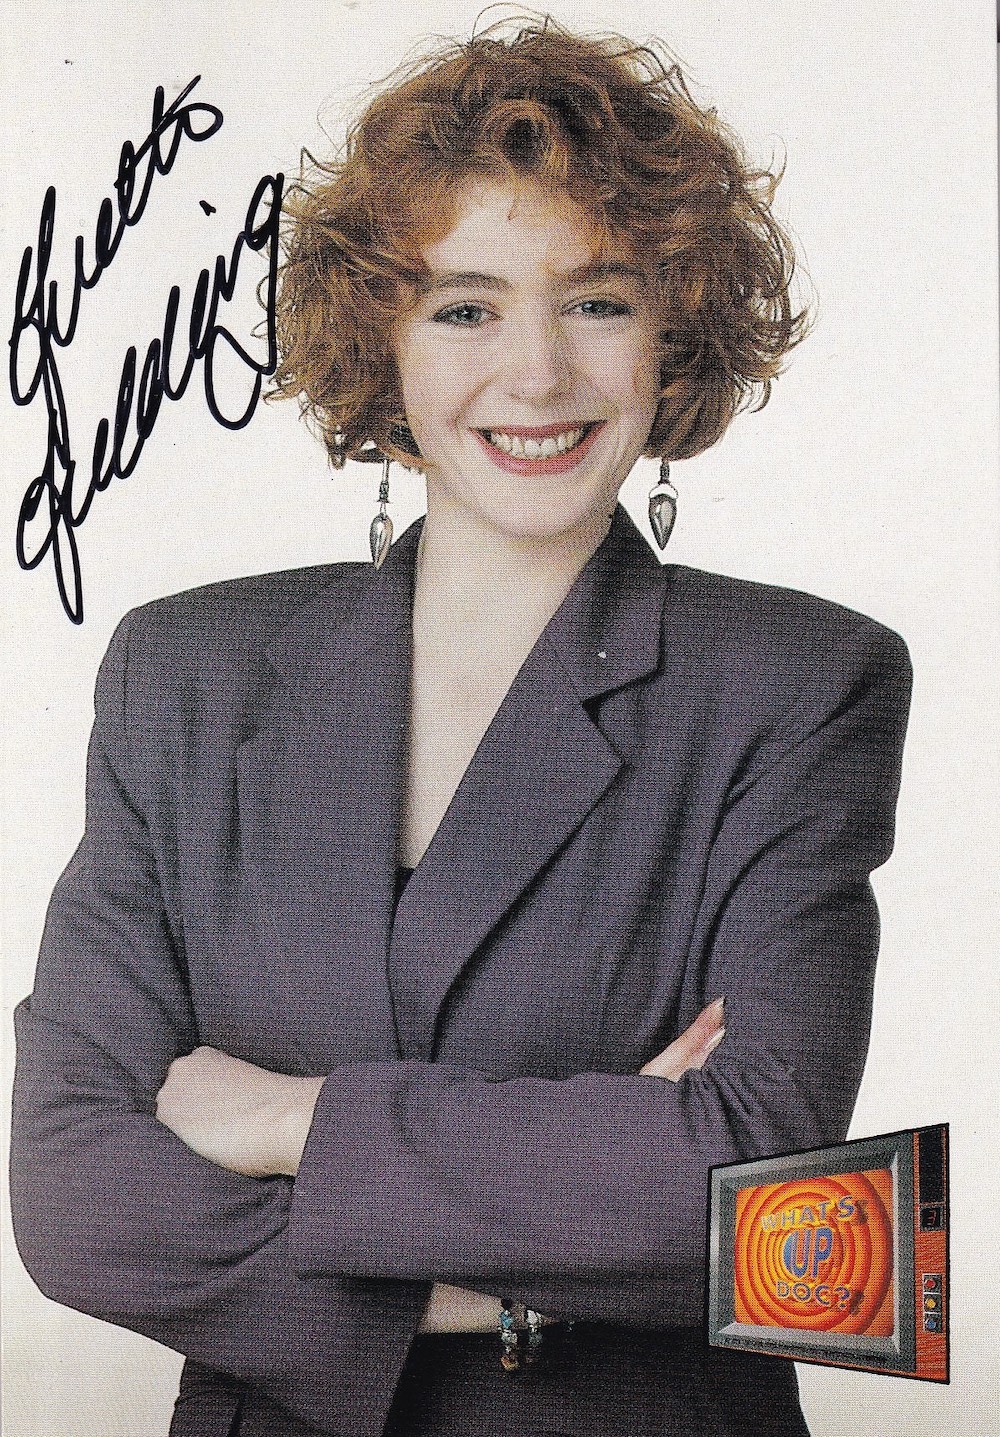 Yvette Fielding Most Haunted Presenter 6x4 inch signed Photo. Good Condition. All autographs come